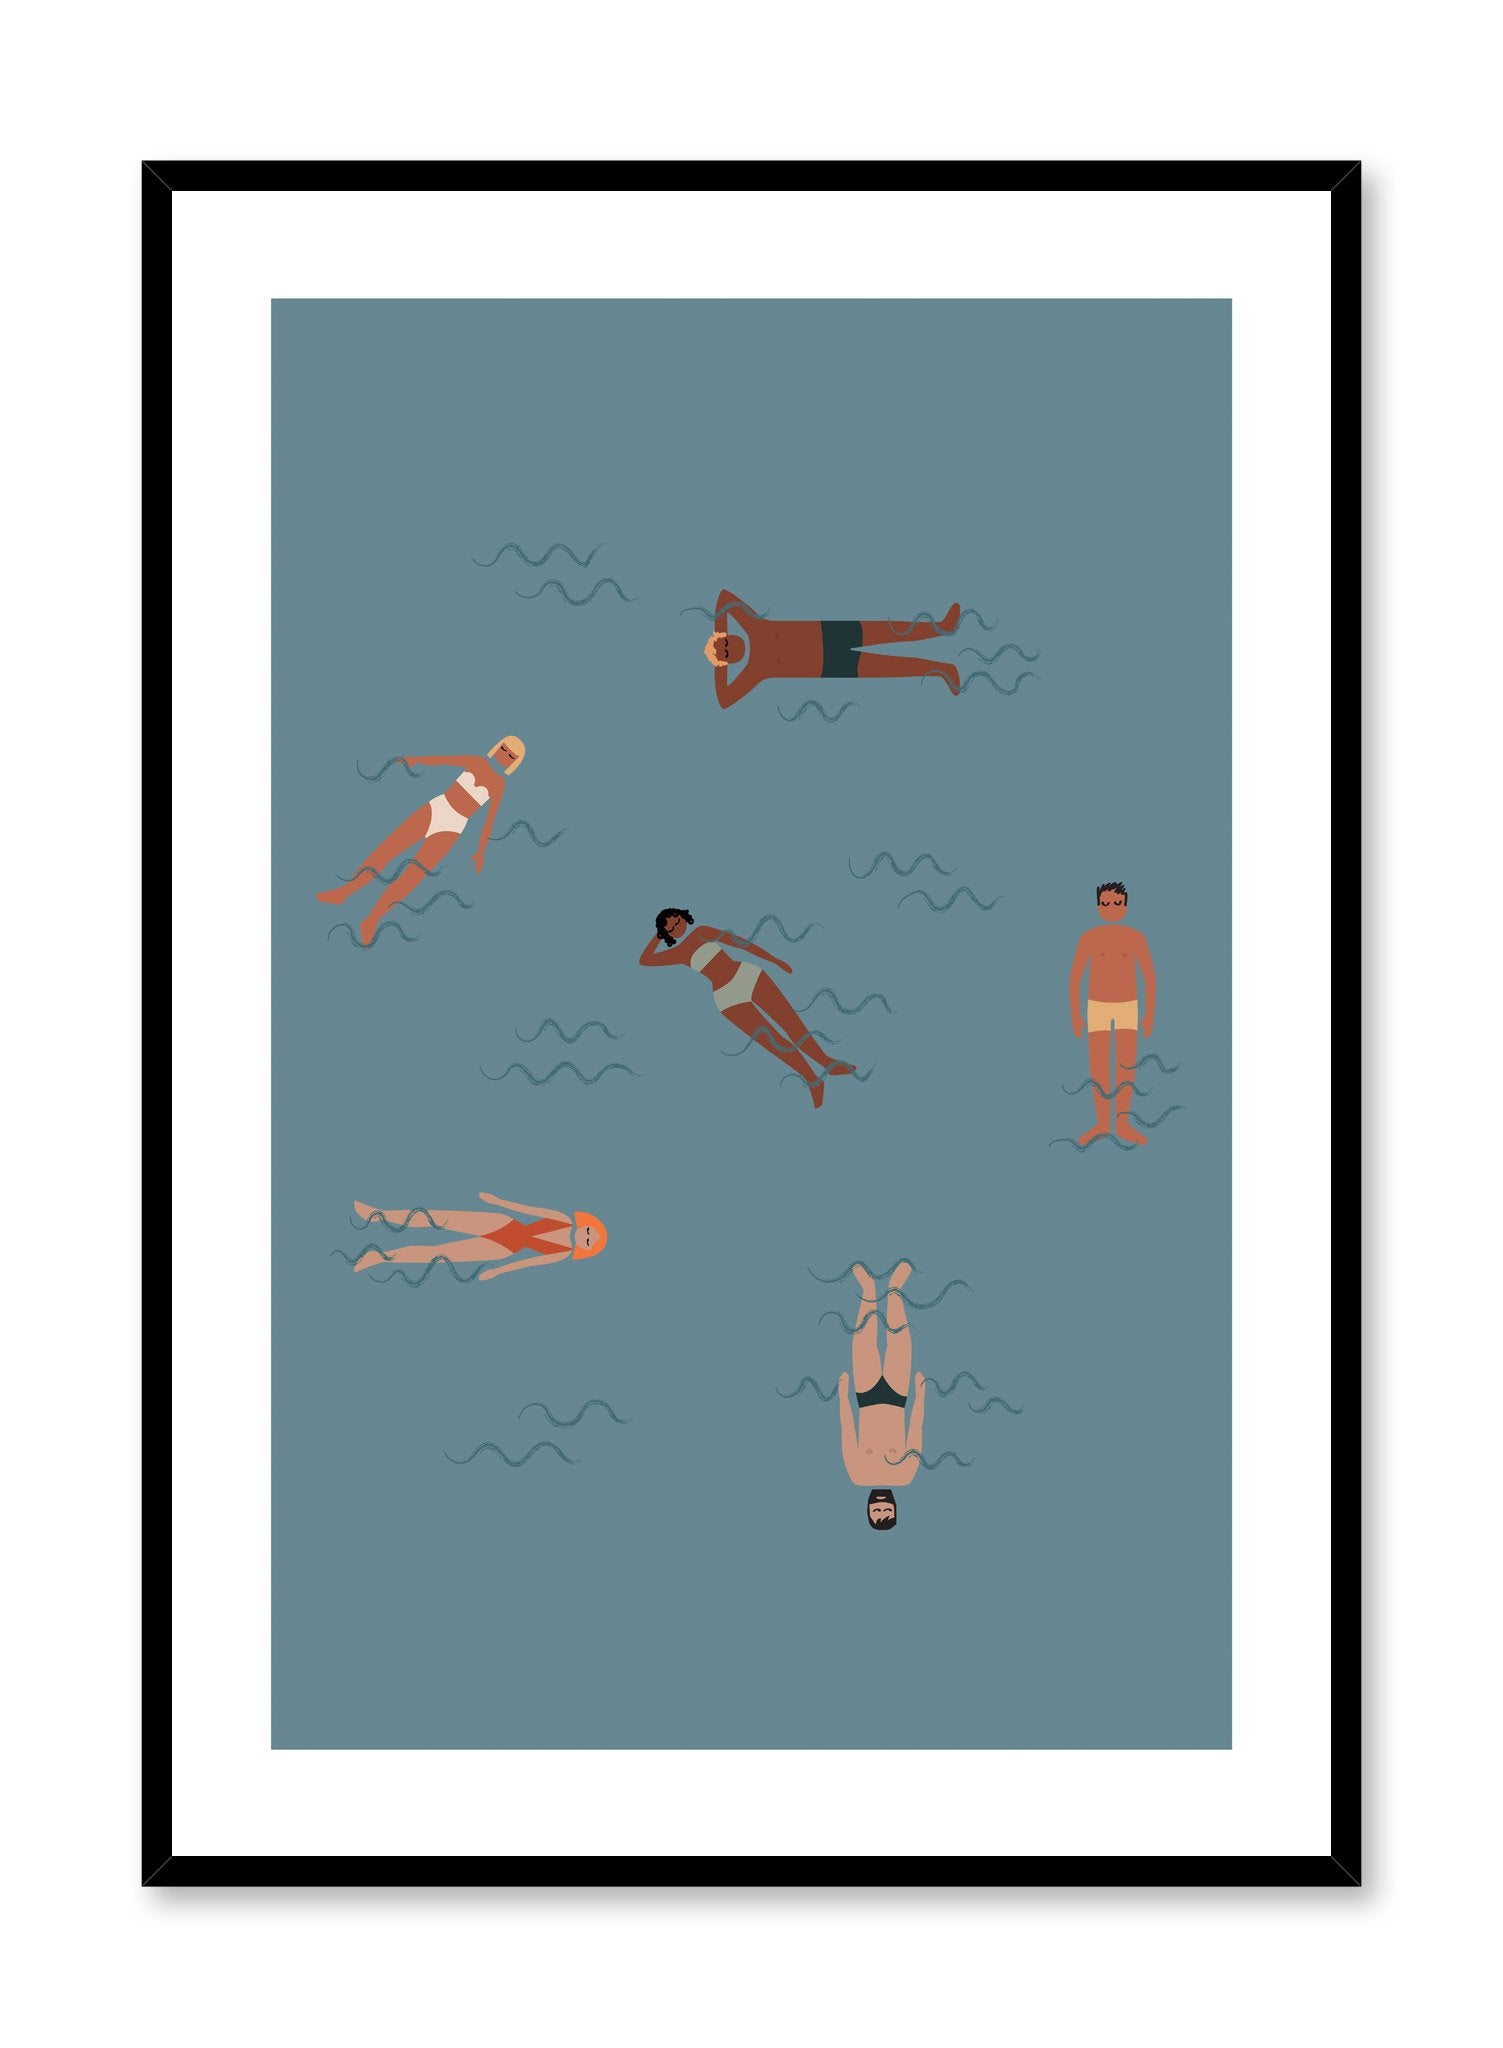 Mid-century modern illustration poster by Opposite Wall with people floating in water.